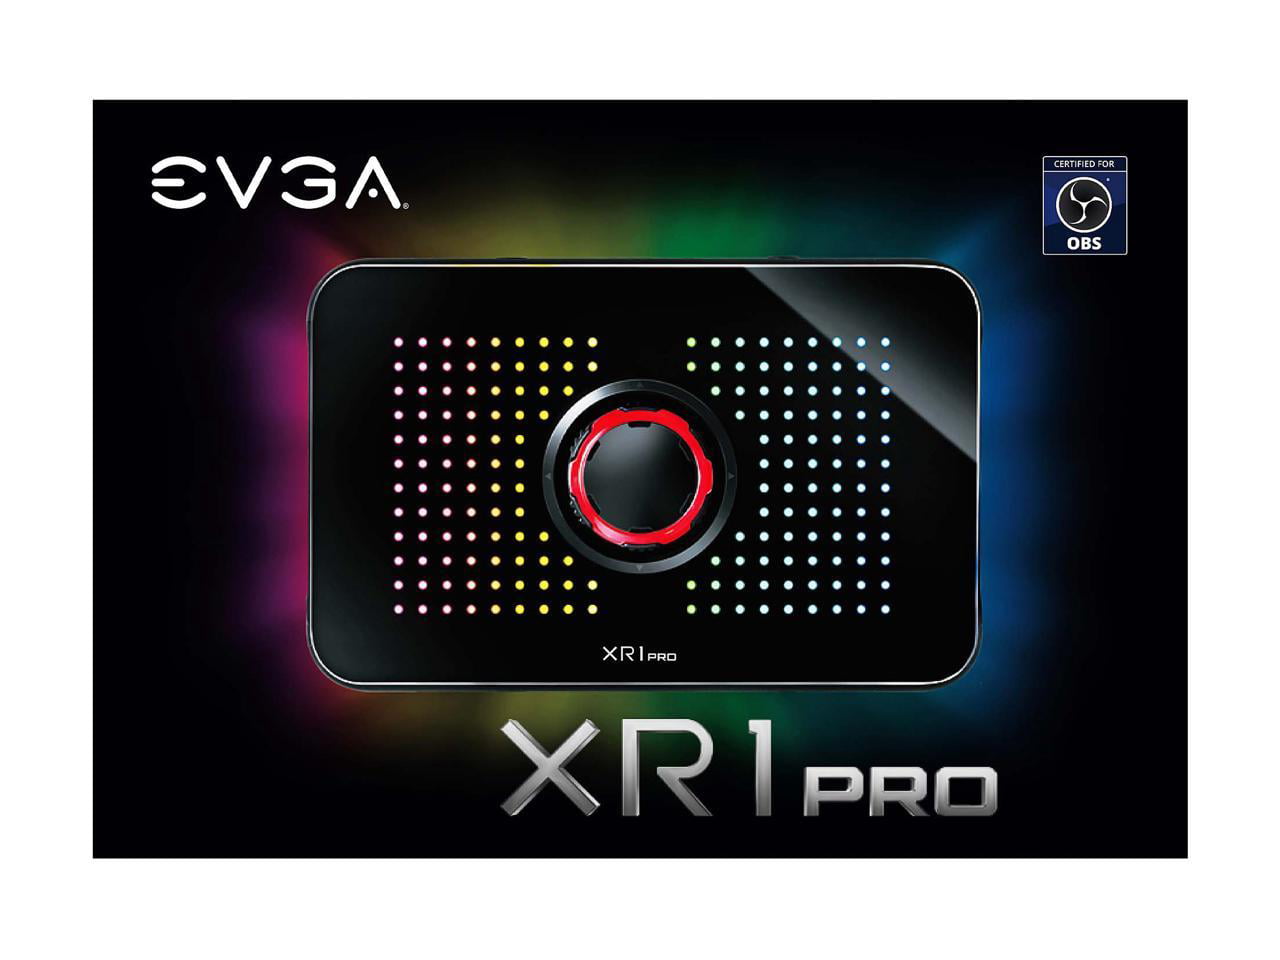 EVGA - Products - EVGA XR1 Pro Capture Card, 1440p/4K HDR Capture/Pass  Through, Certified for OBS, USB 3.1, ARGB, Audio Mixer - 144-U1-CB21-LR